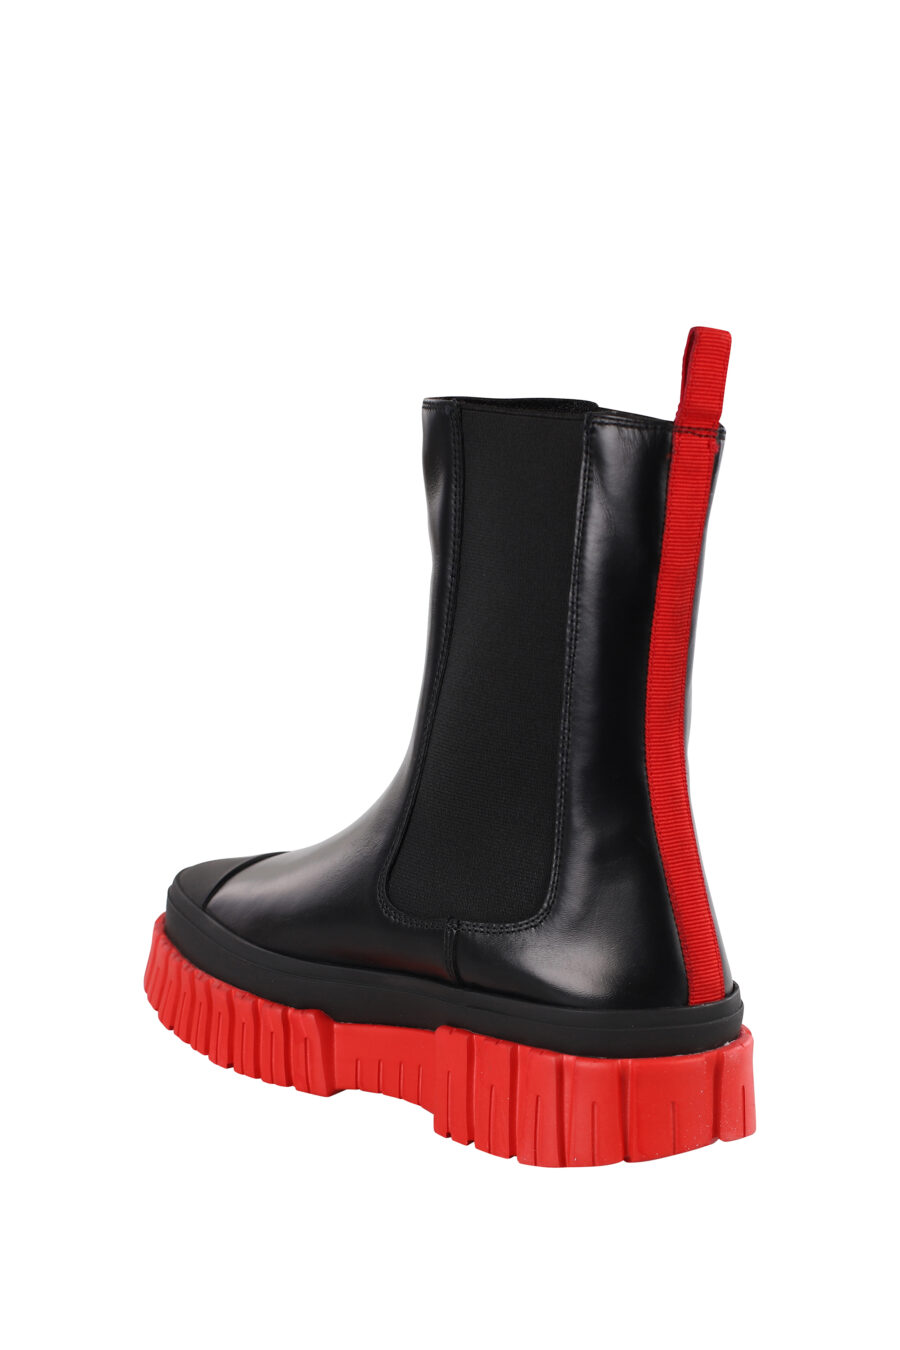 Black ankle boots with red sole and white mini-logo - IMG 1190